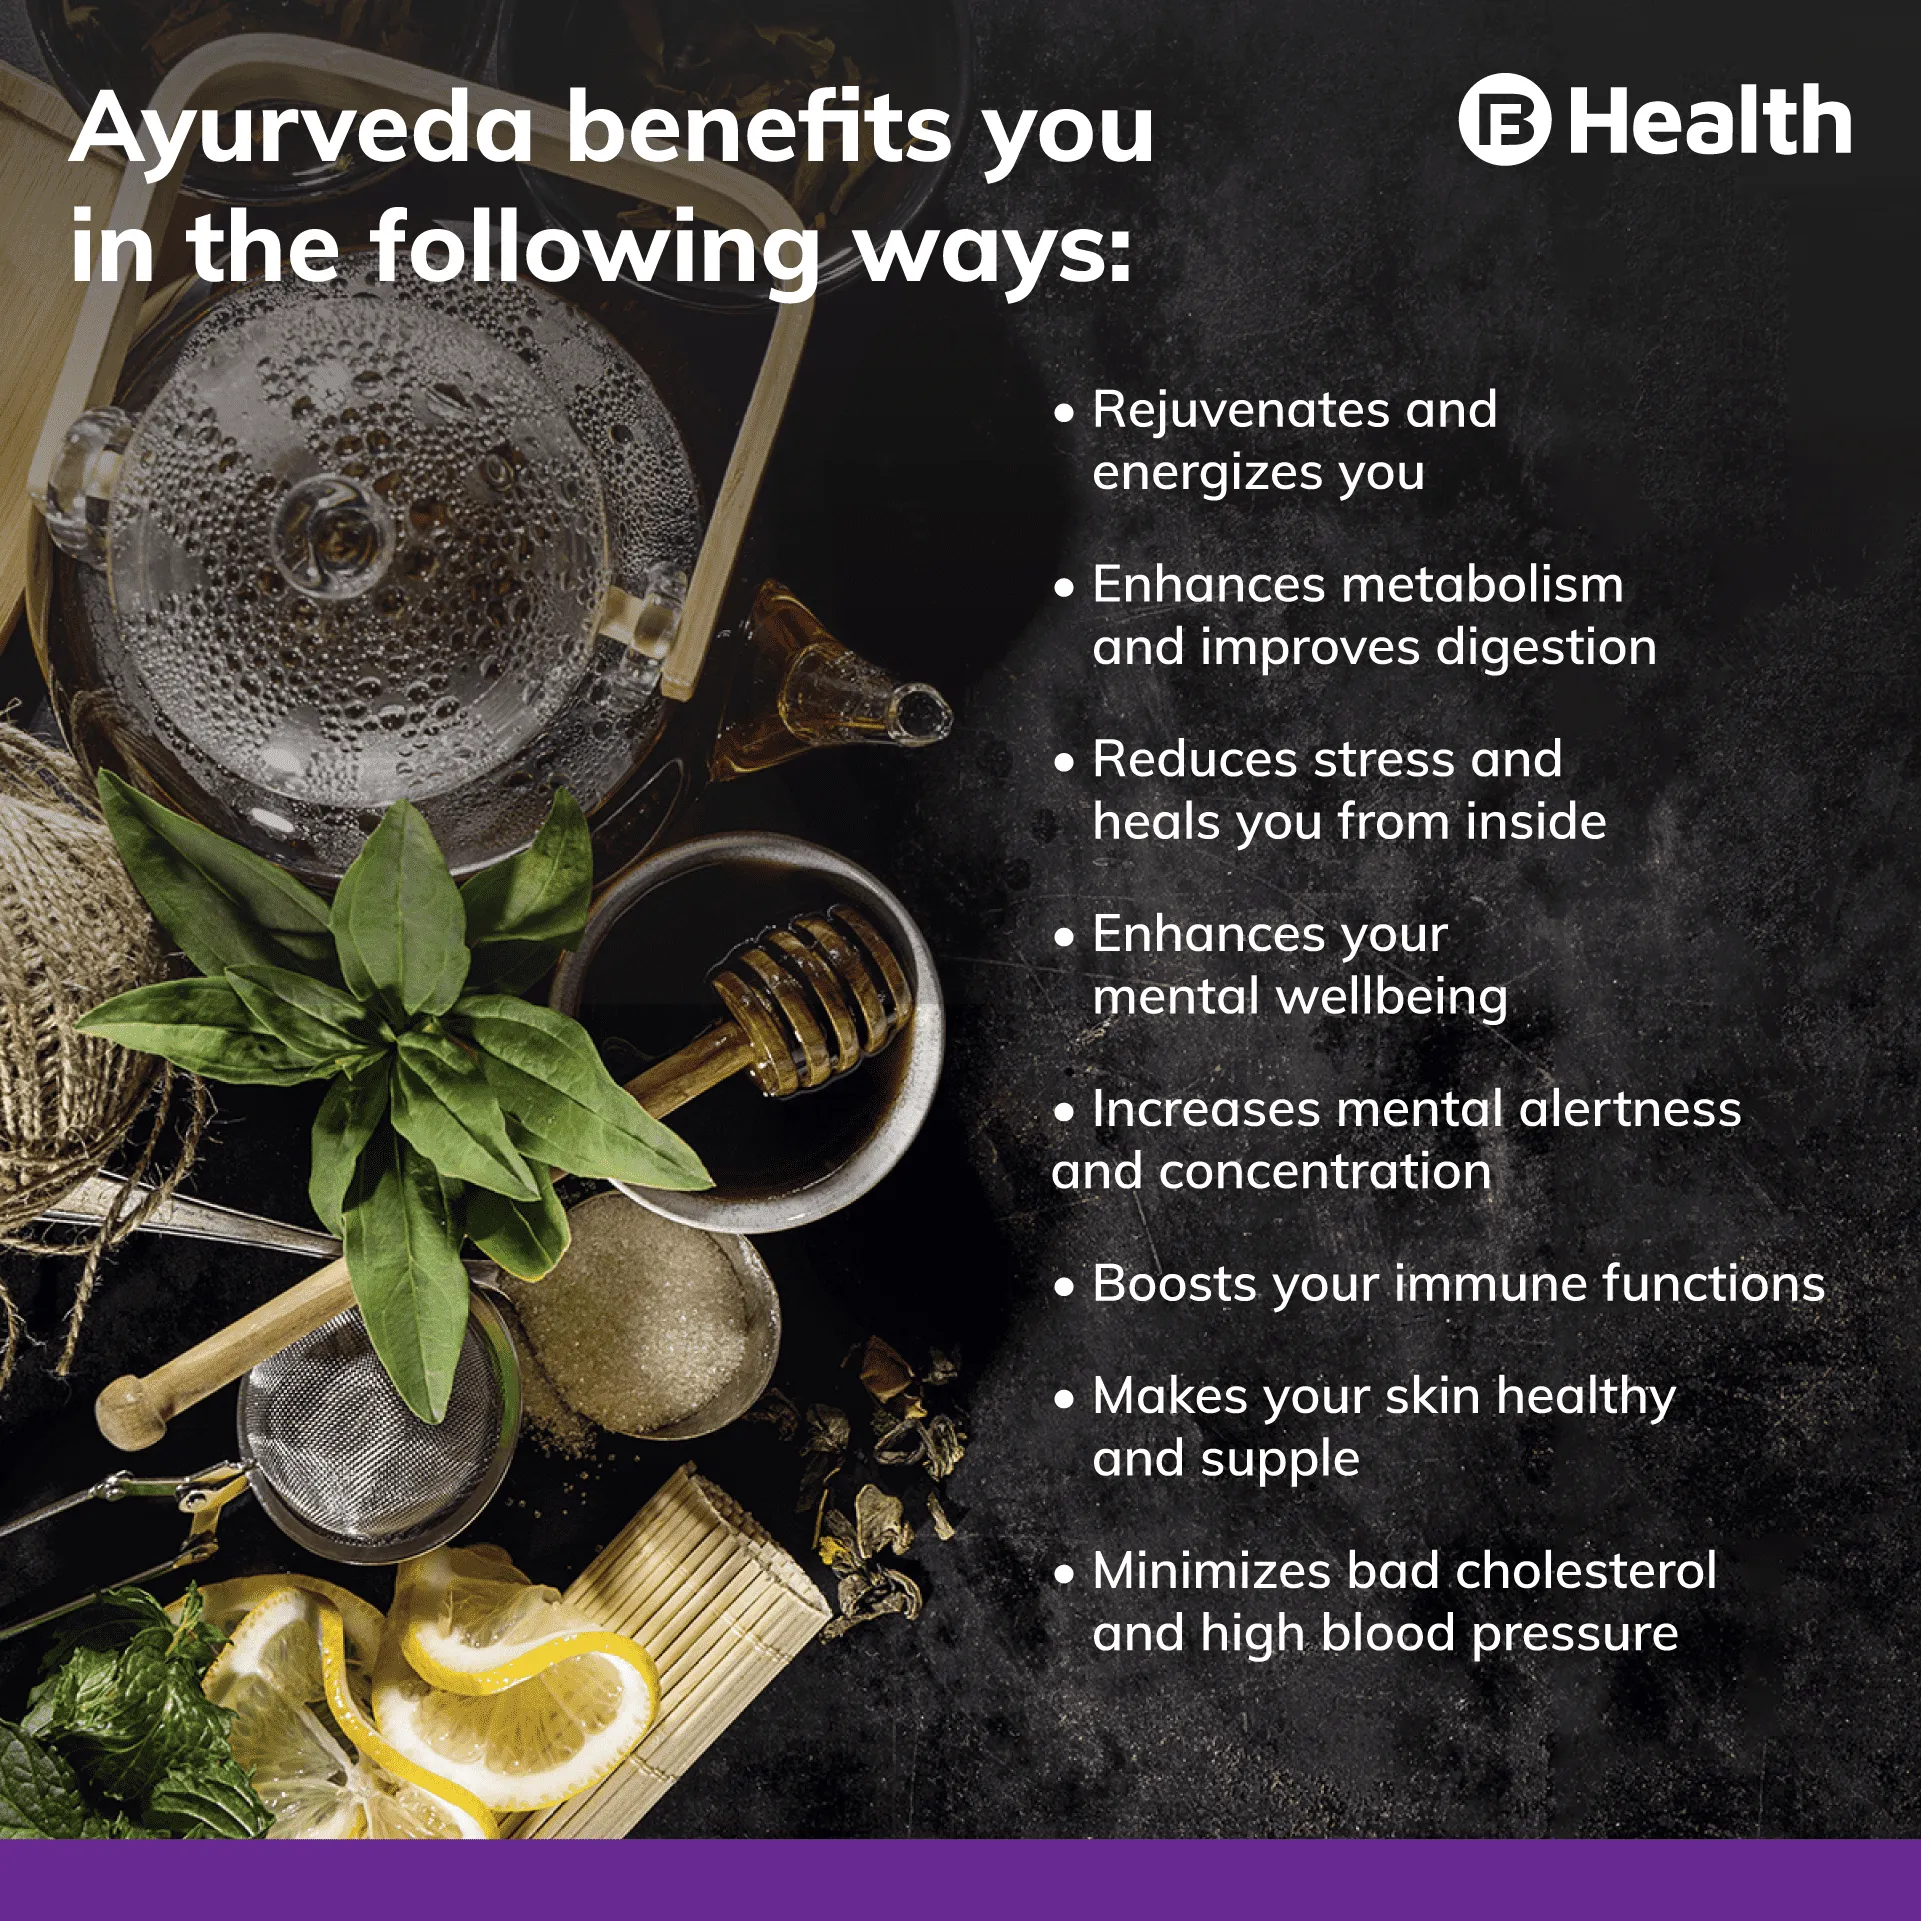 Ayurveda in daily life